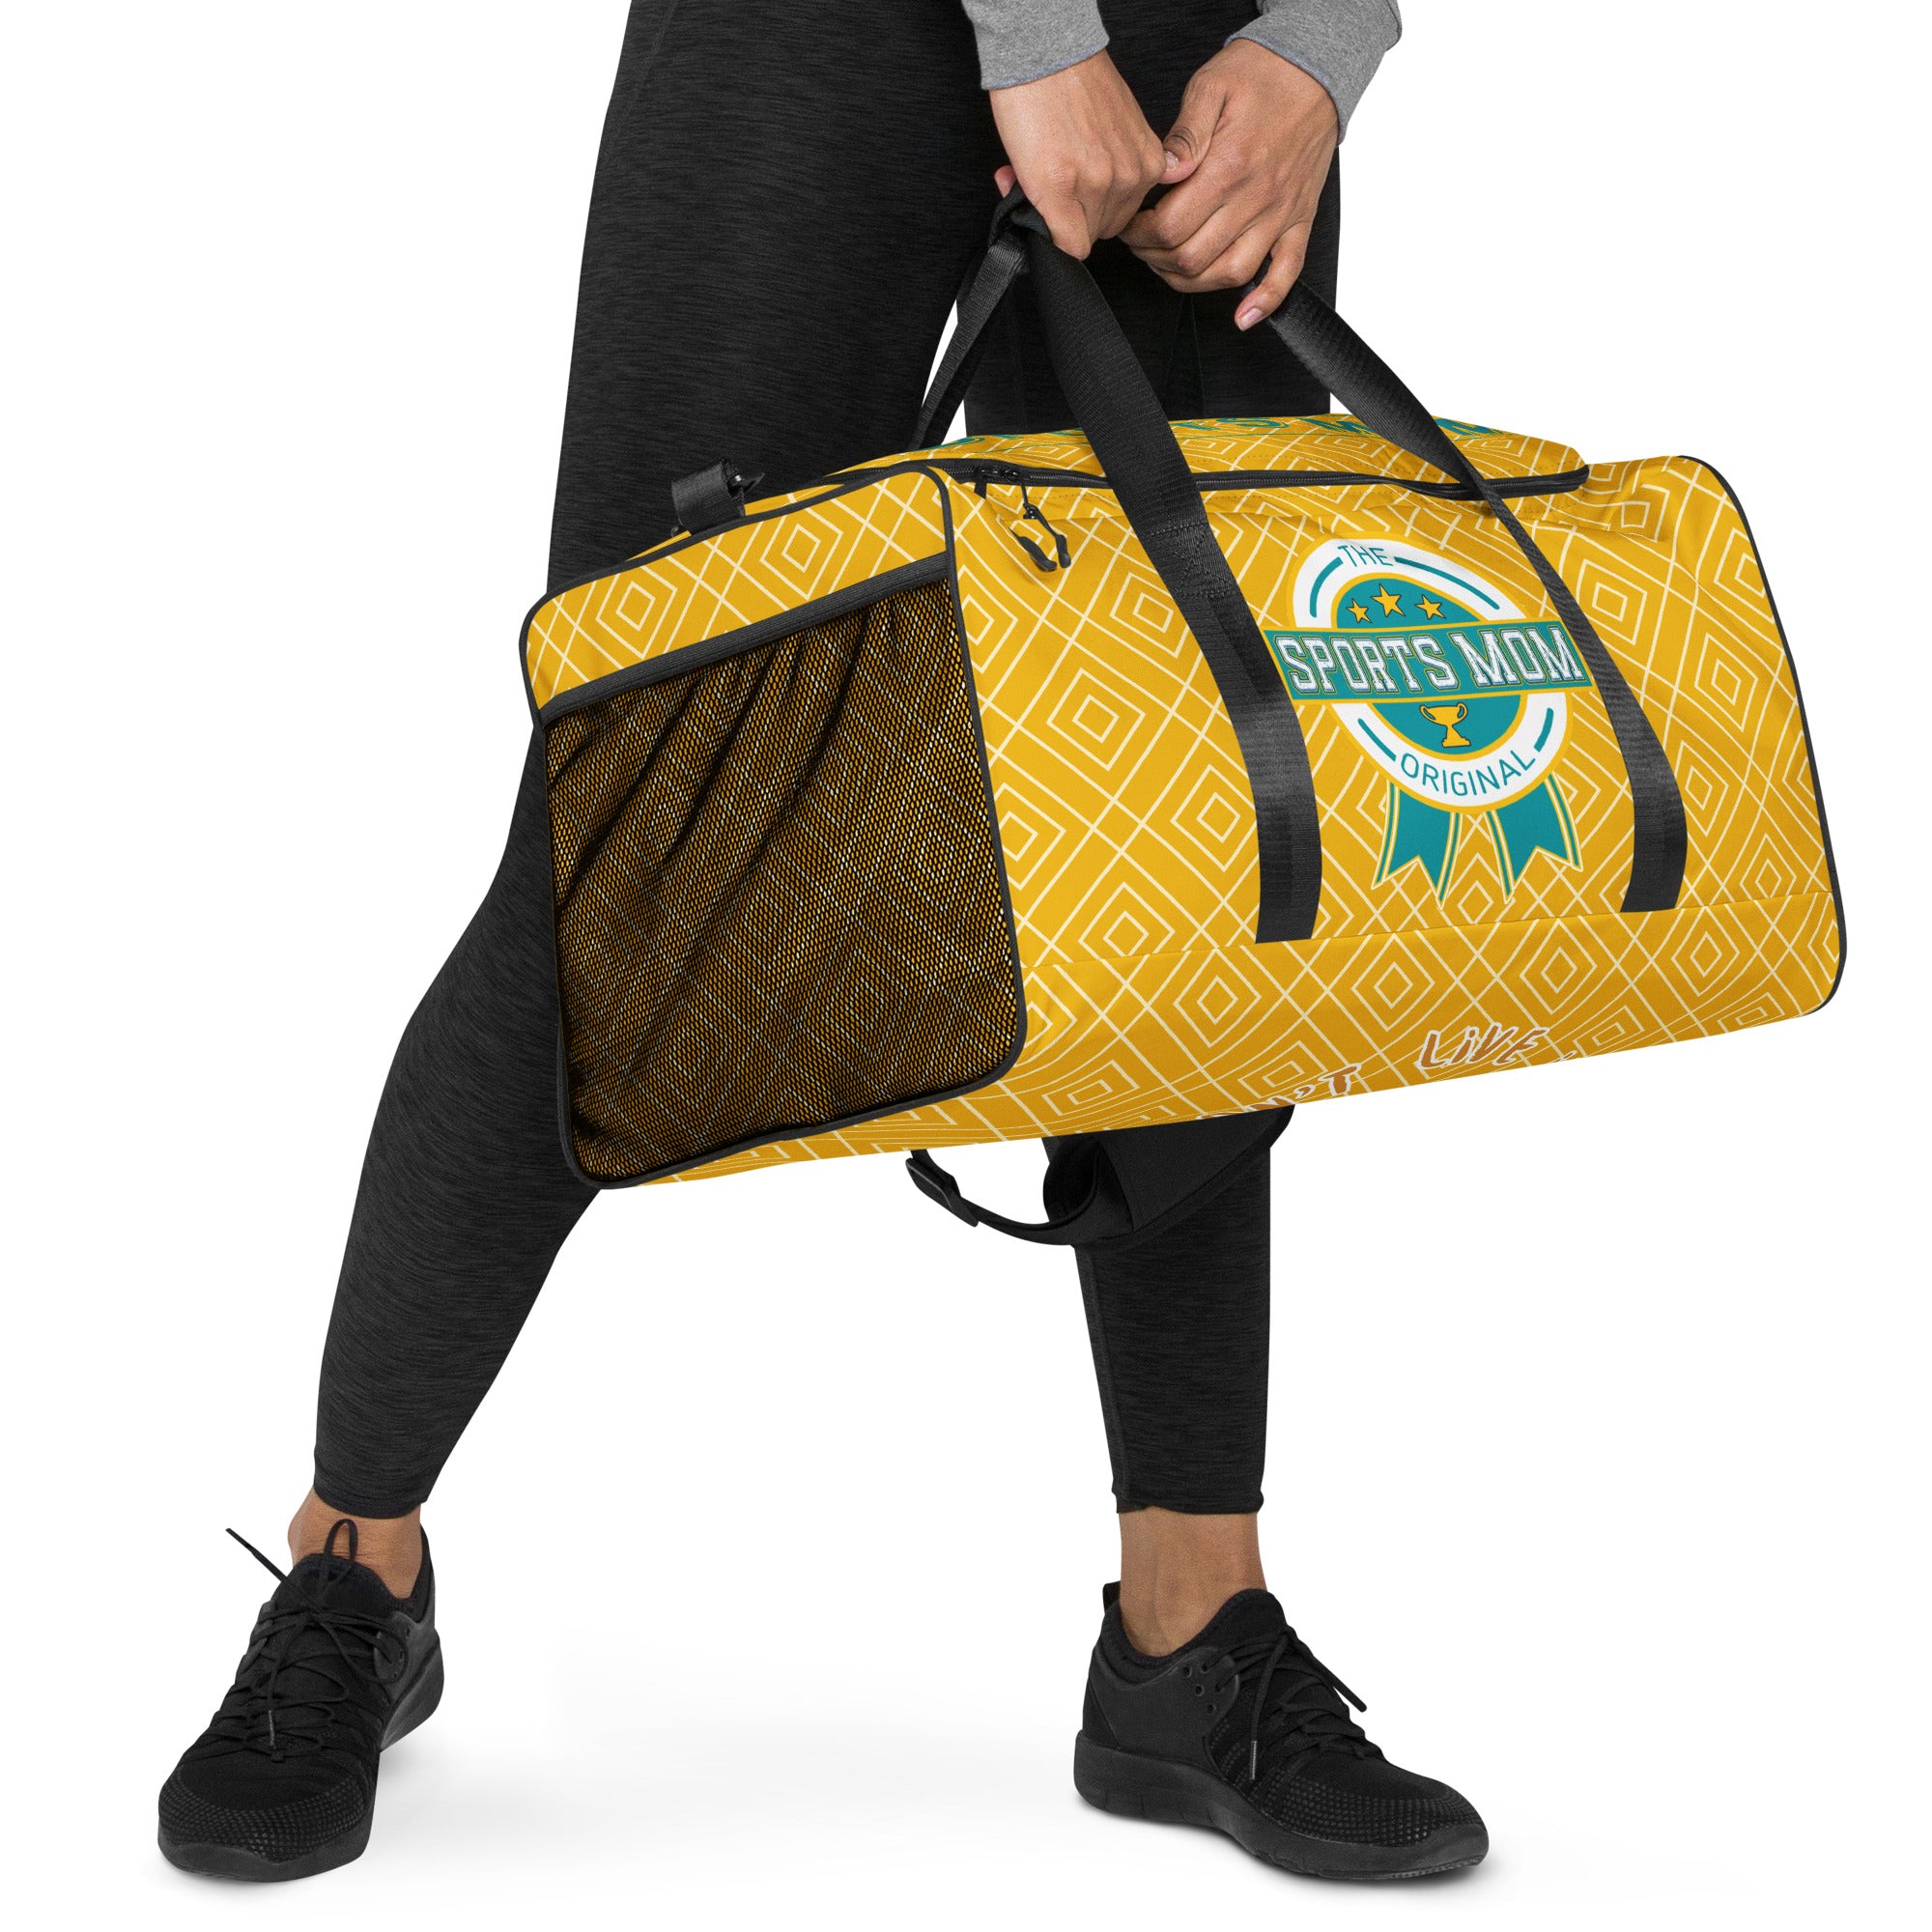 Sports Mom Ultimate Duffle Bag - Lioness